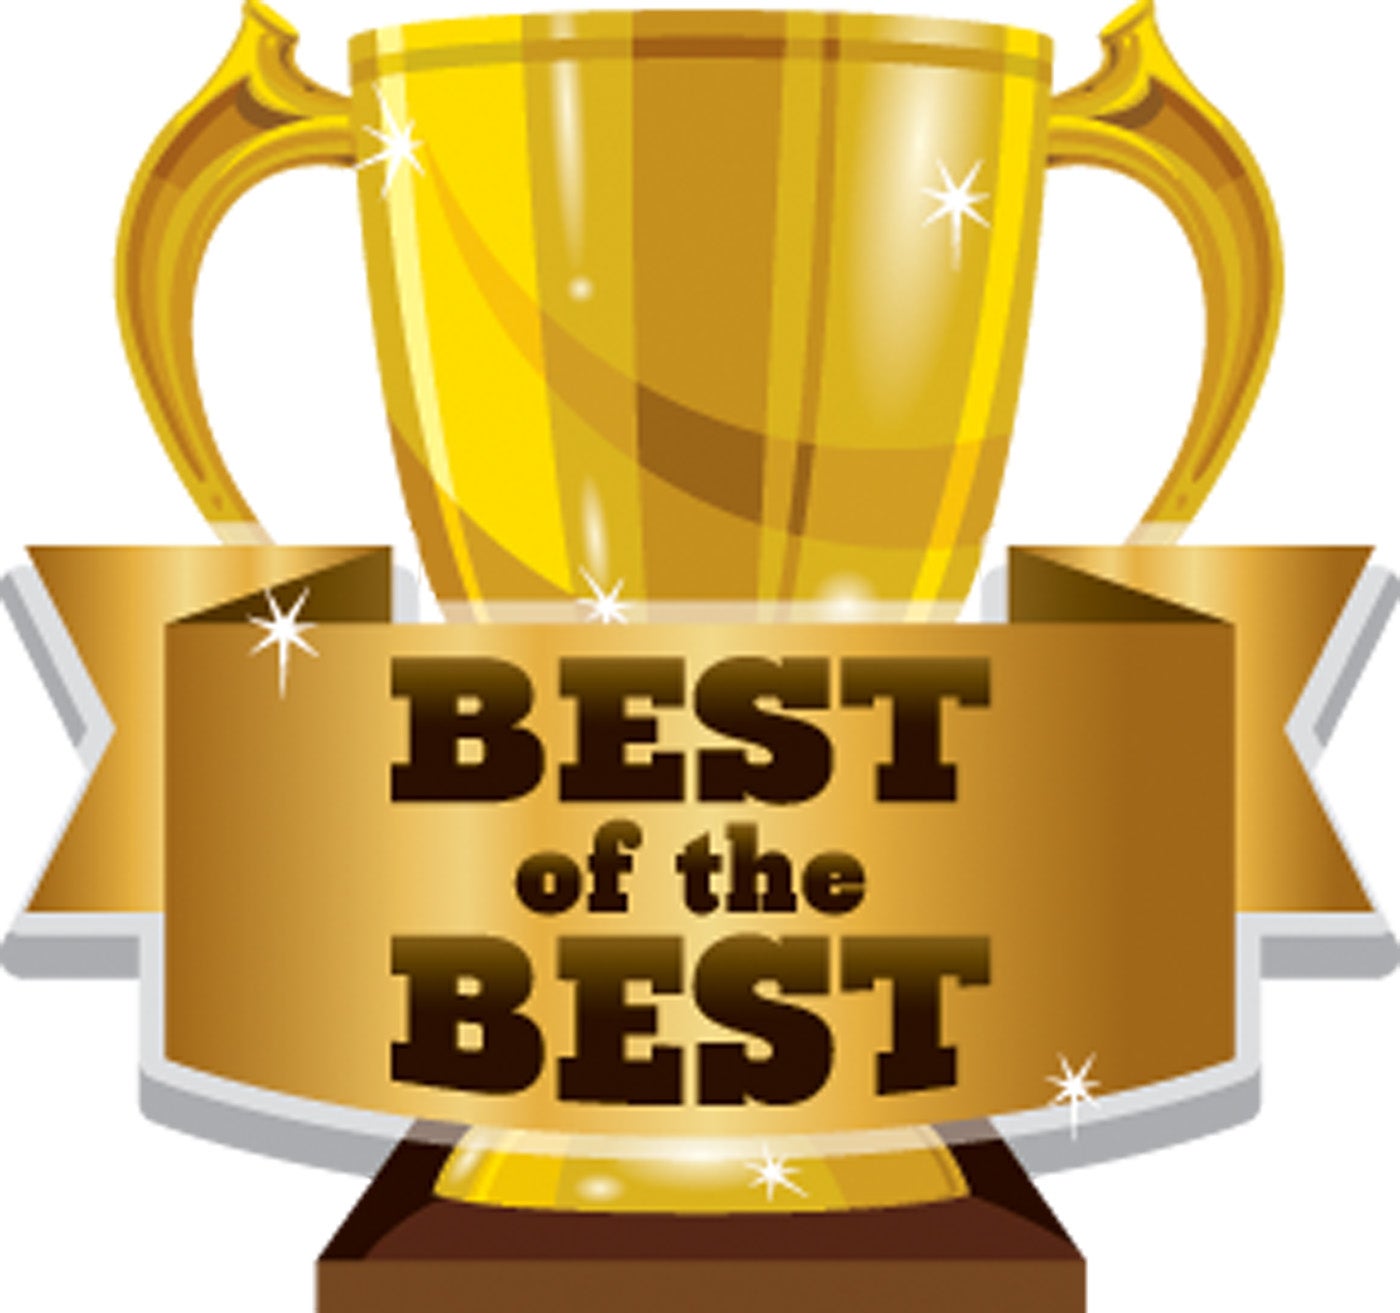 Cause you re the best. The best надпись. Эмблема the best. Best of the best. Надпись best of the best.